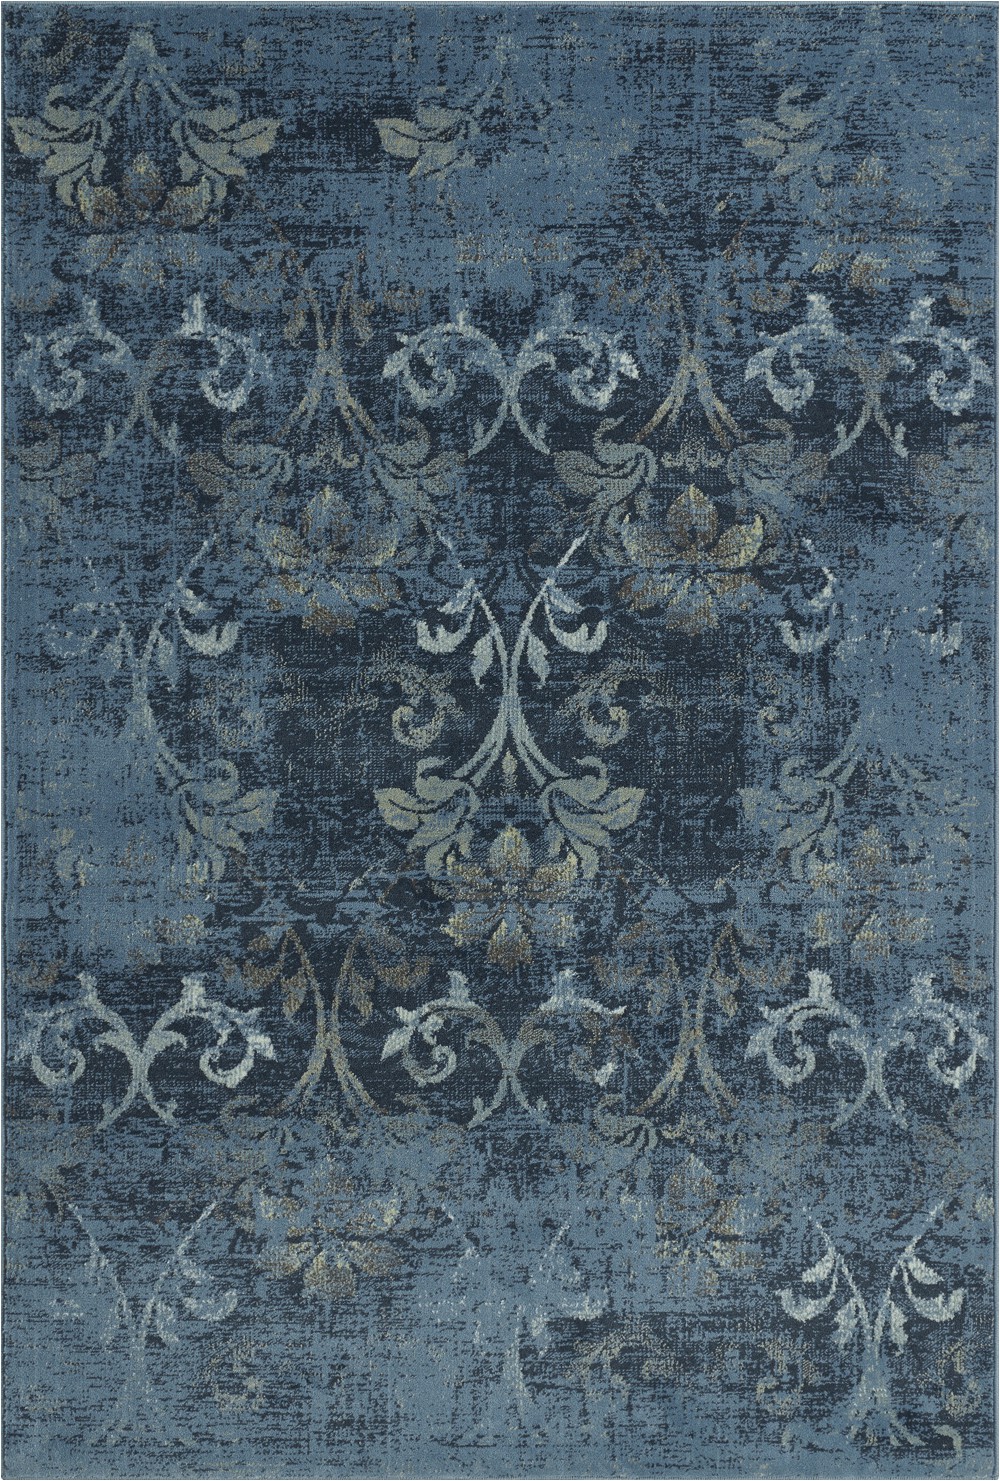 Macy S Dalyn area Rug Details About 8×10 Blue Vines Curls Leaves Floral area Rug Dalyn Bc1244 Aprx 8 2" X 10